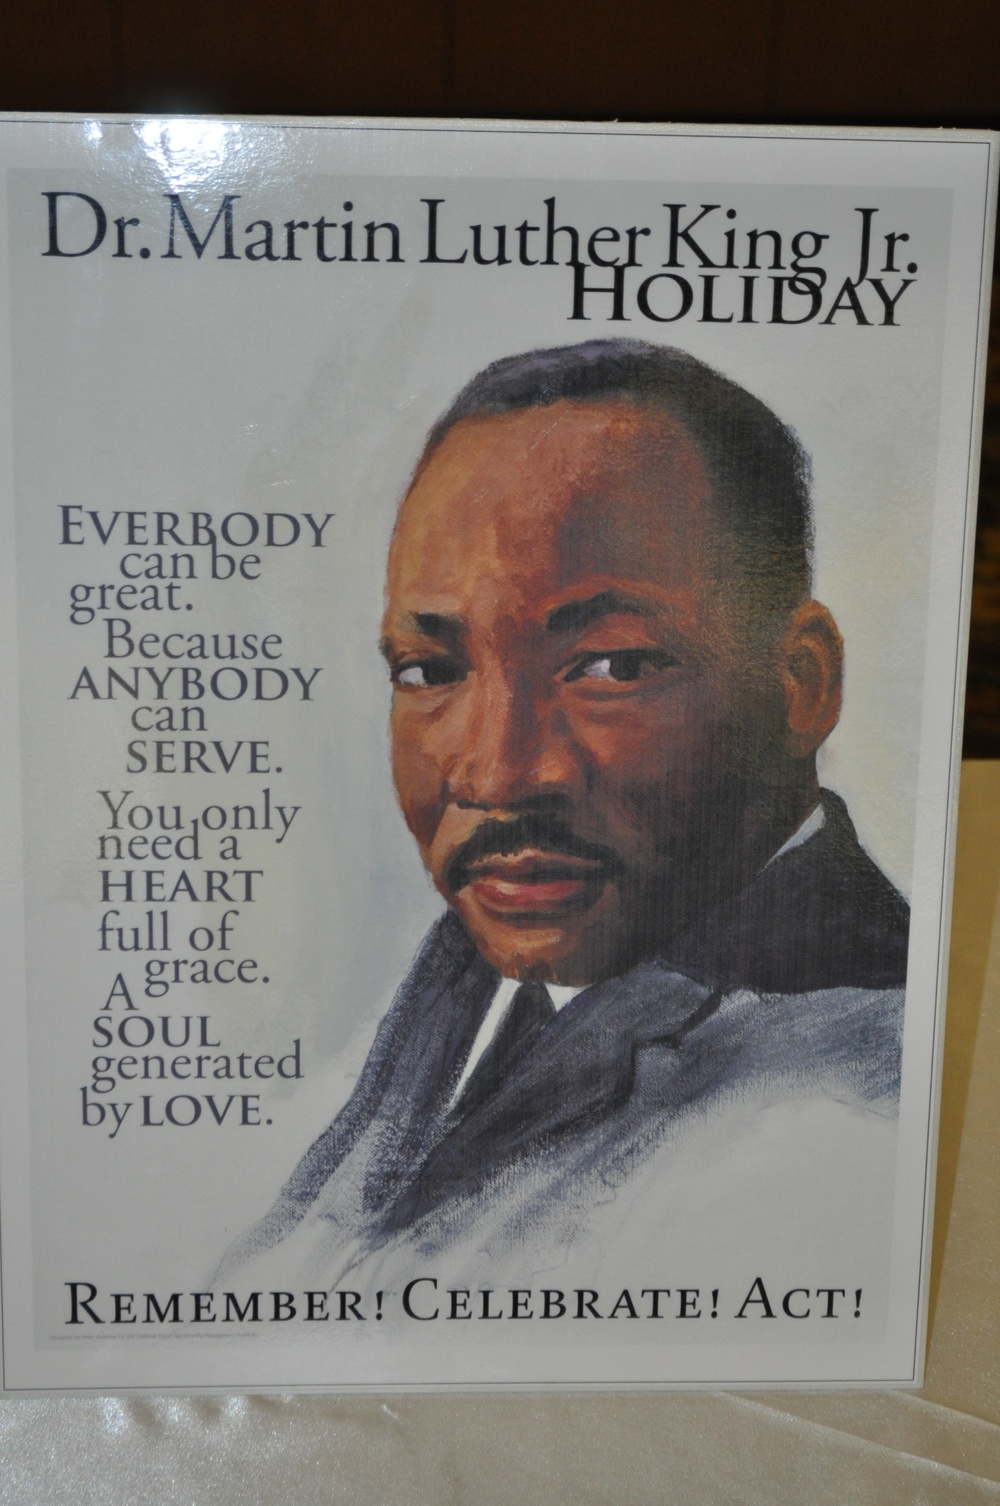 Remembering and celebrating the life of Dr. Martin Luther King Jr.